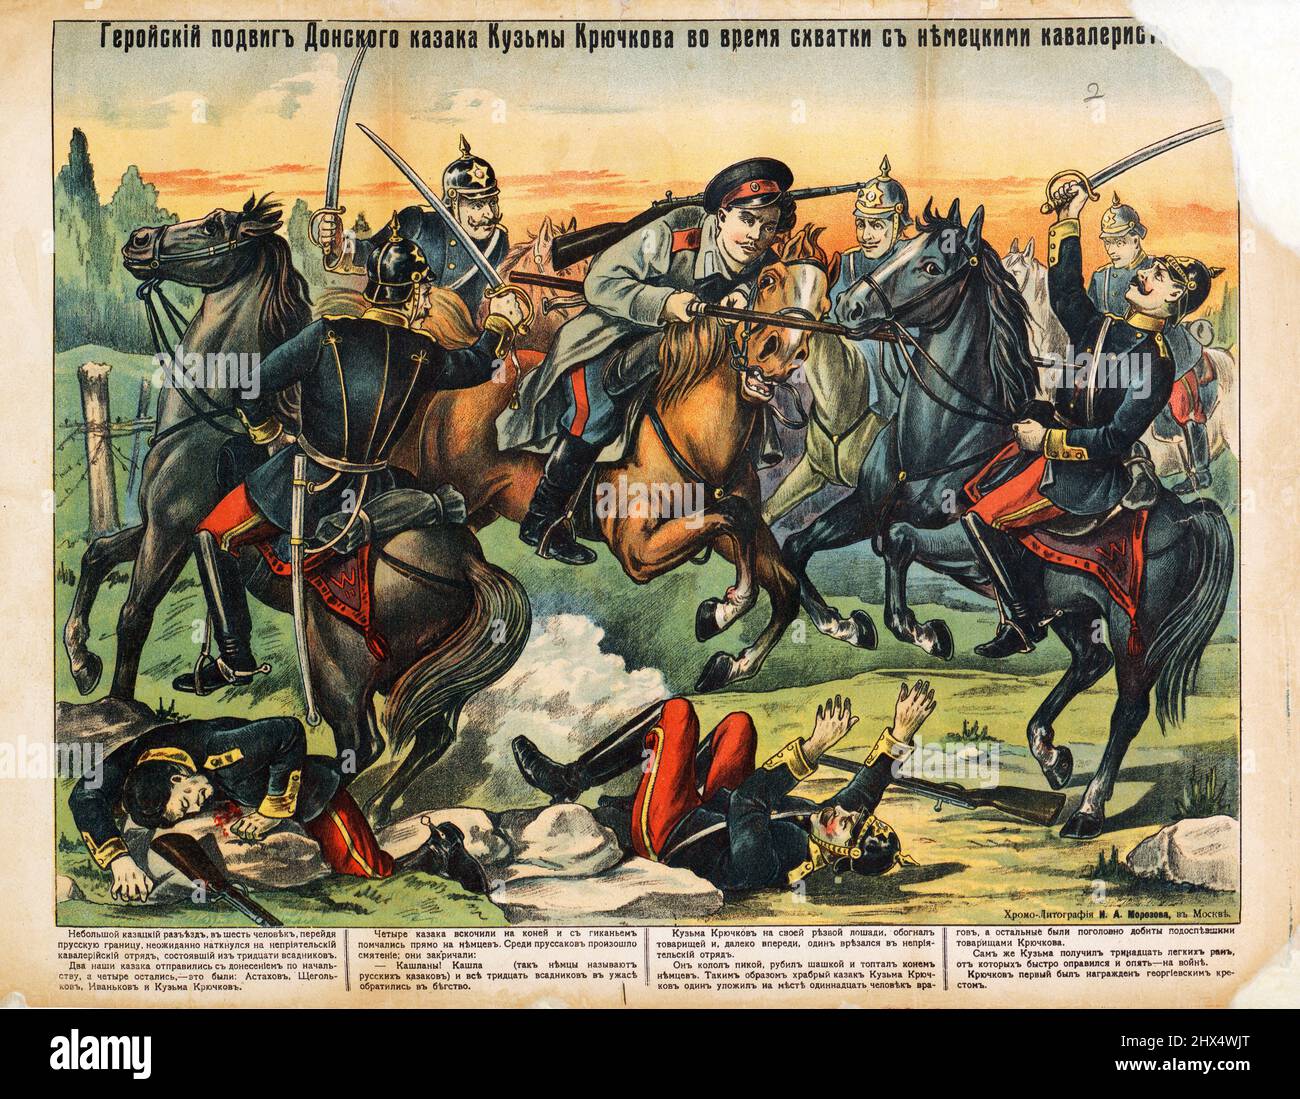 The Heroic Feat of Don Cossack Kuzma Kryuchkov During a Fight with German Cavalrymen. I. A. Morozov Chromolithography, 1914-1915. Vintage Lubok WWI. Stock Photo